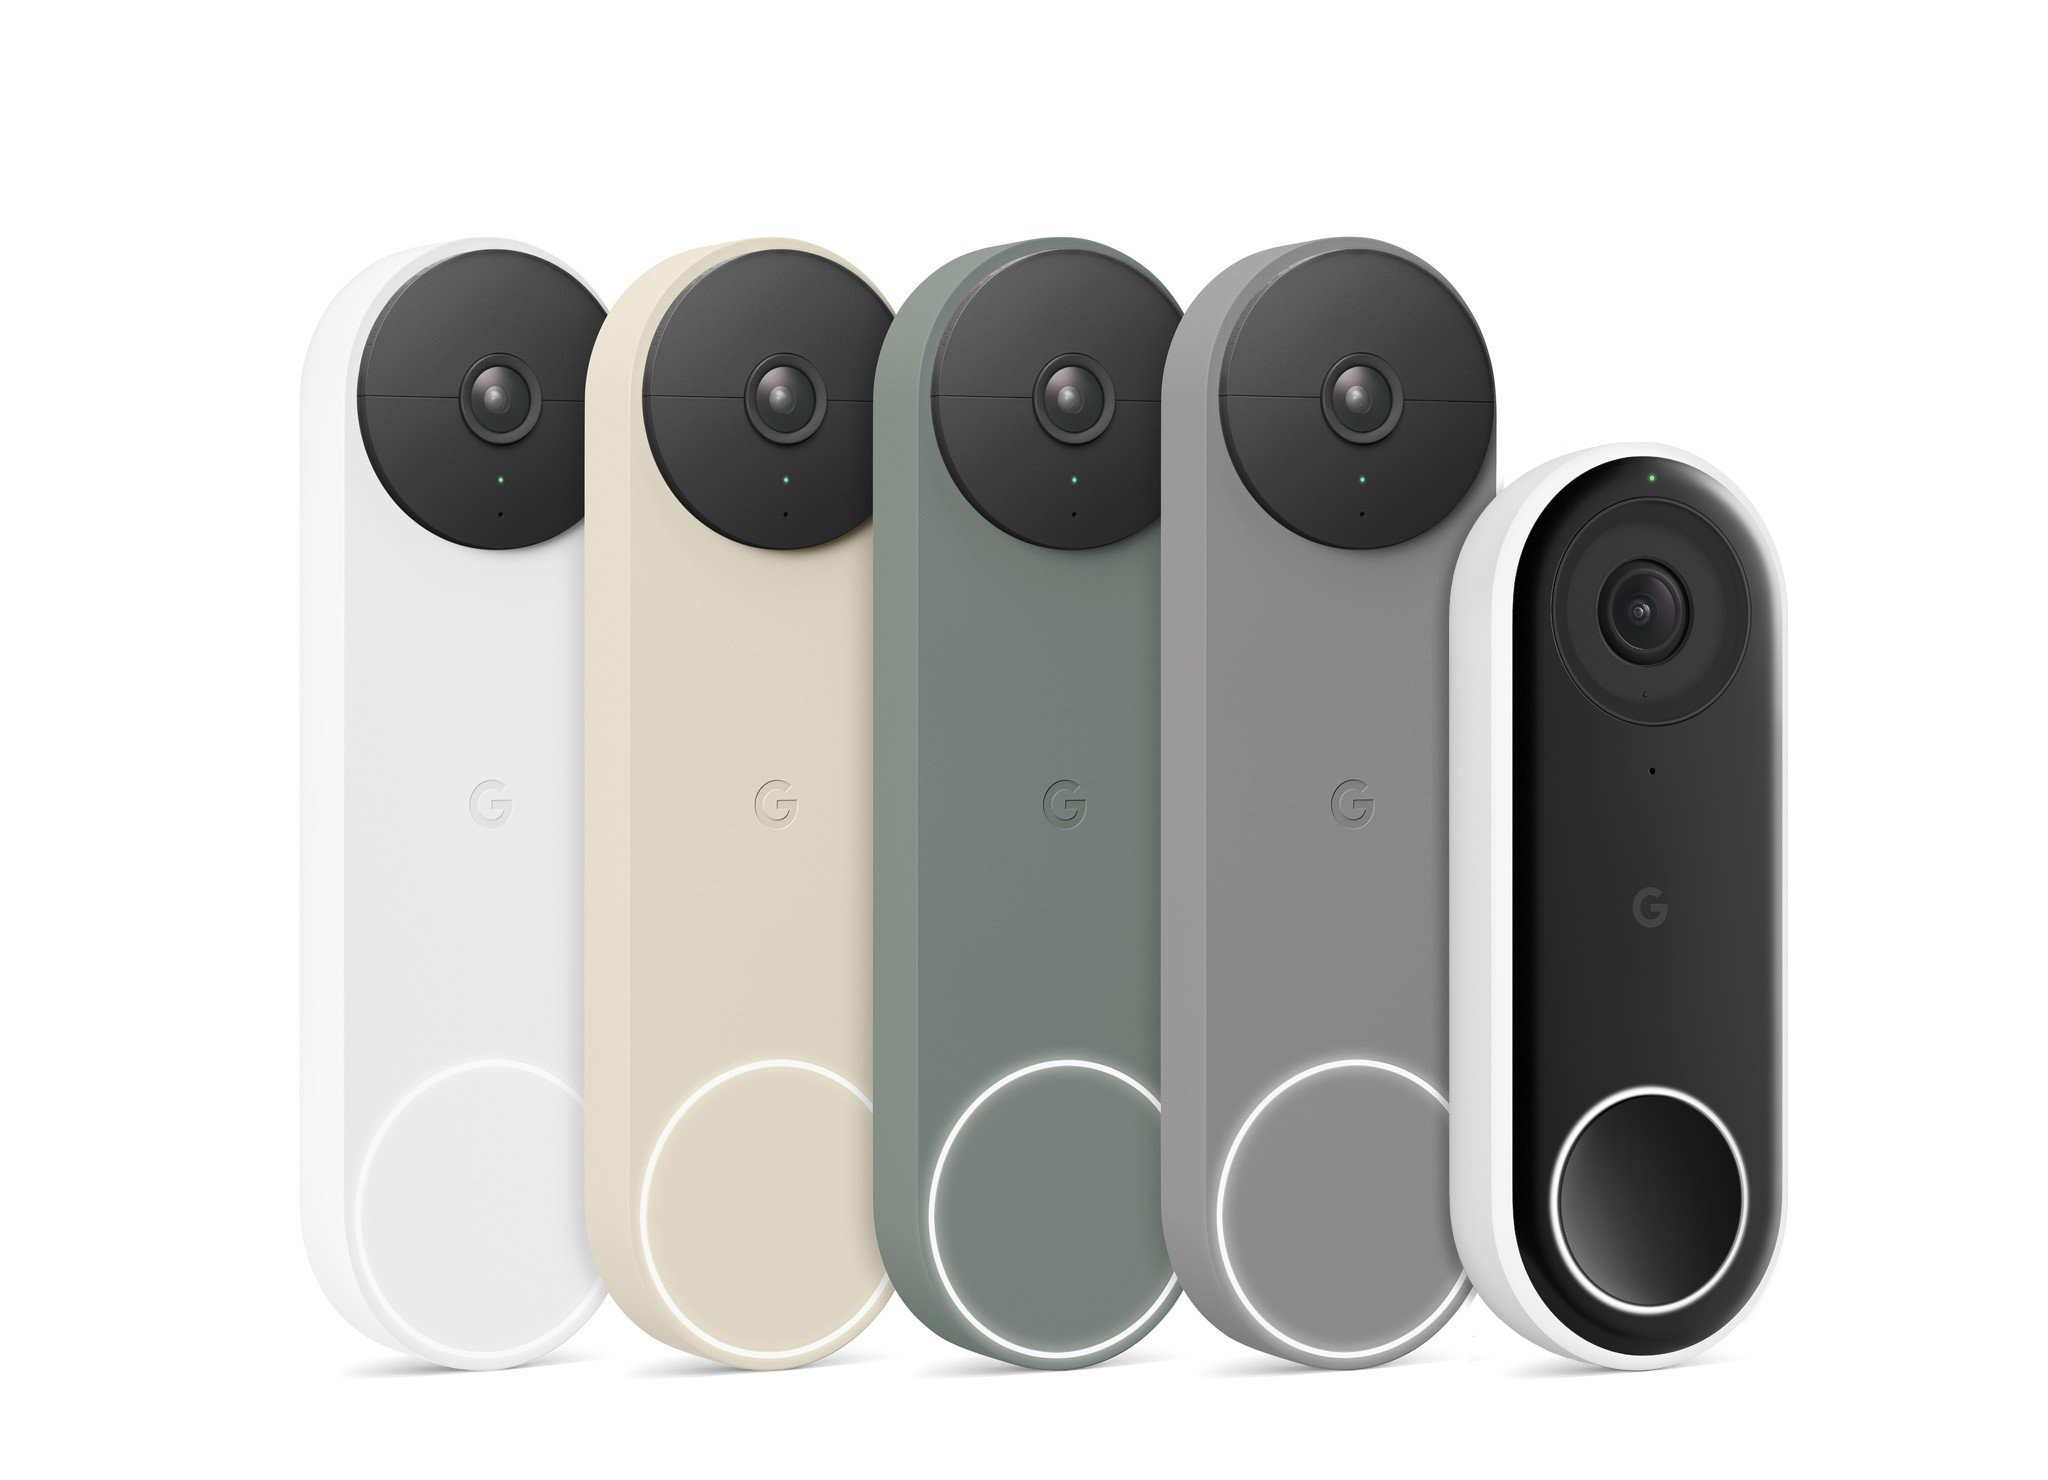 why Google Nest Doorbell won't connect to WiFi - causes and how to fix them 1.0